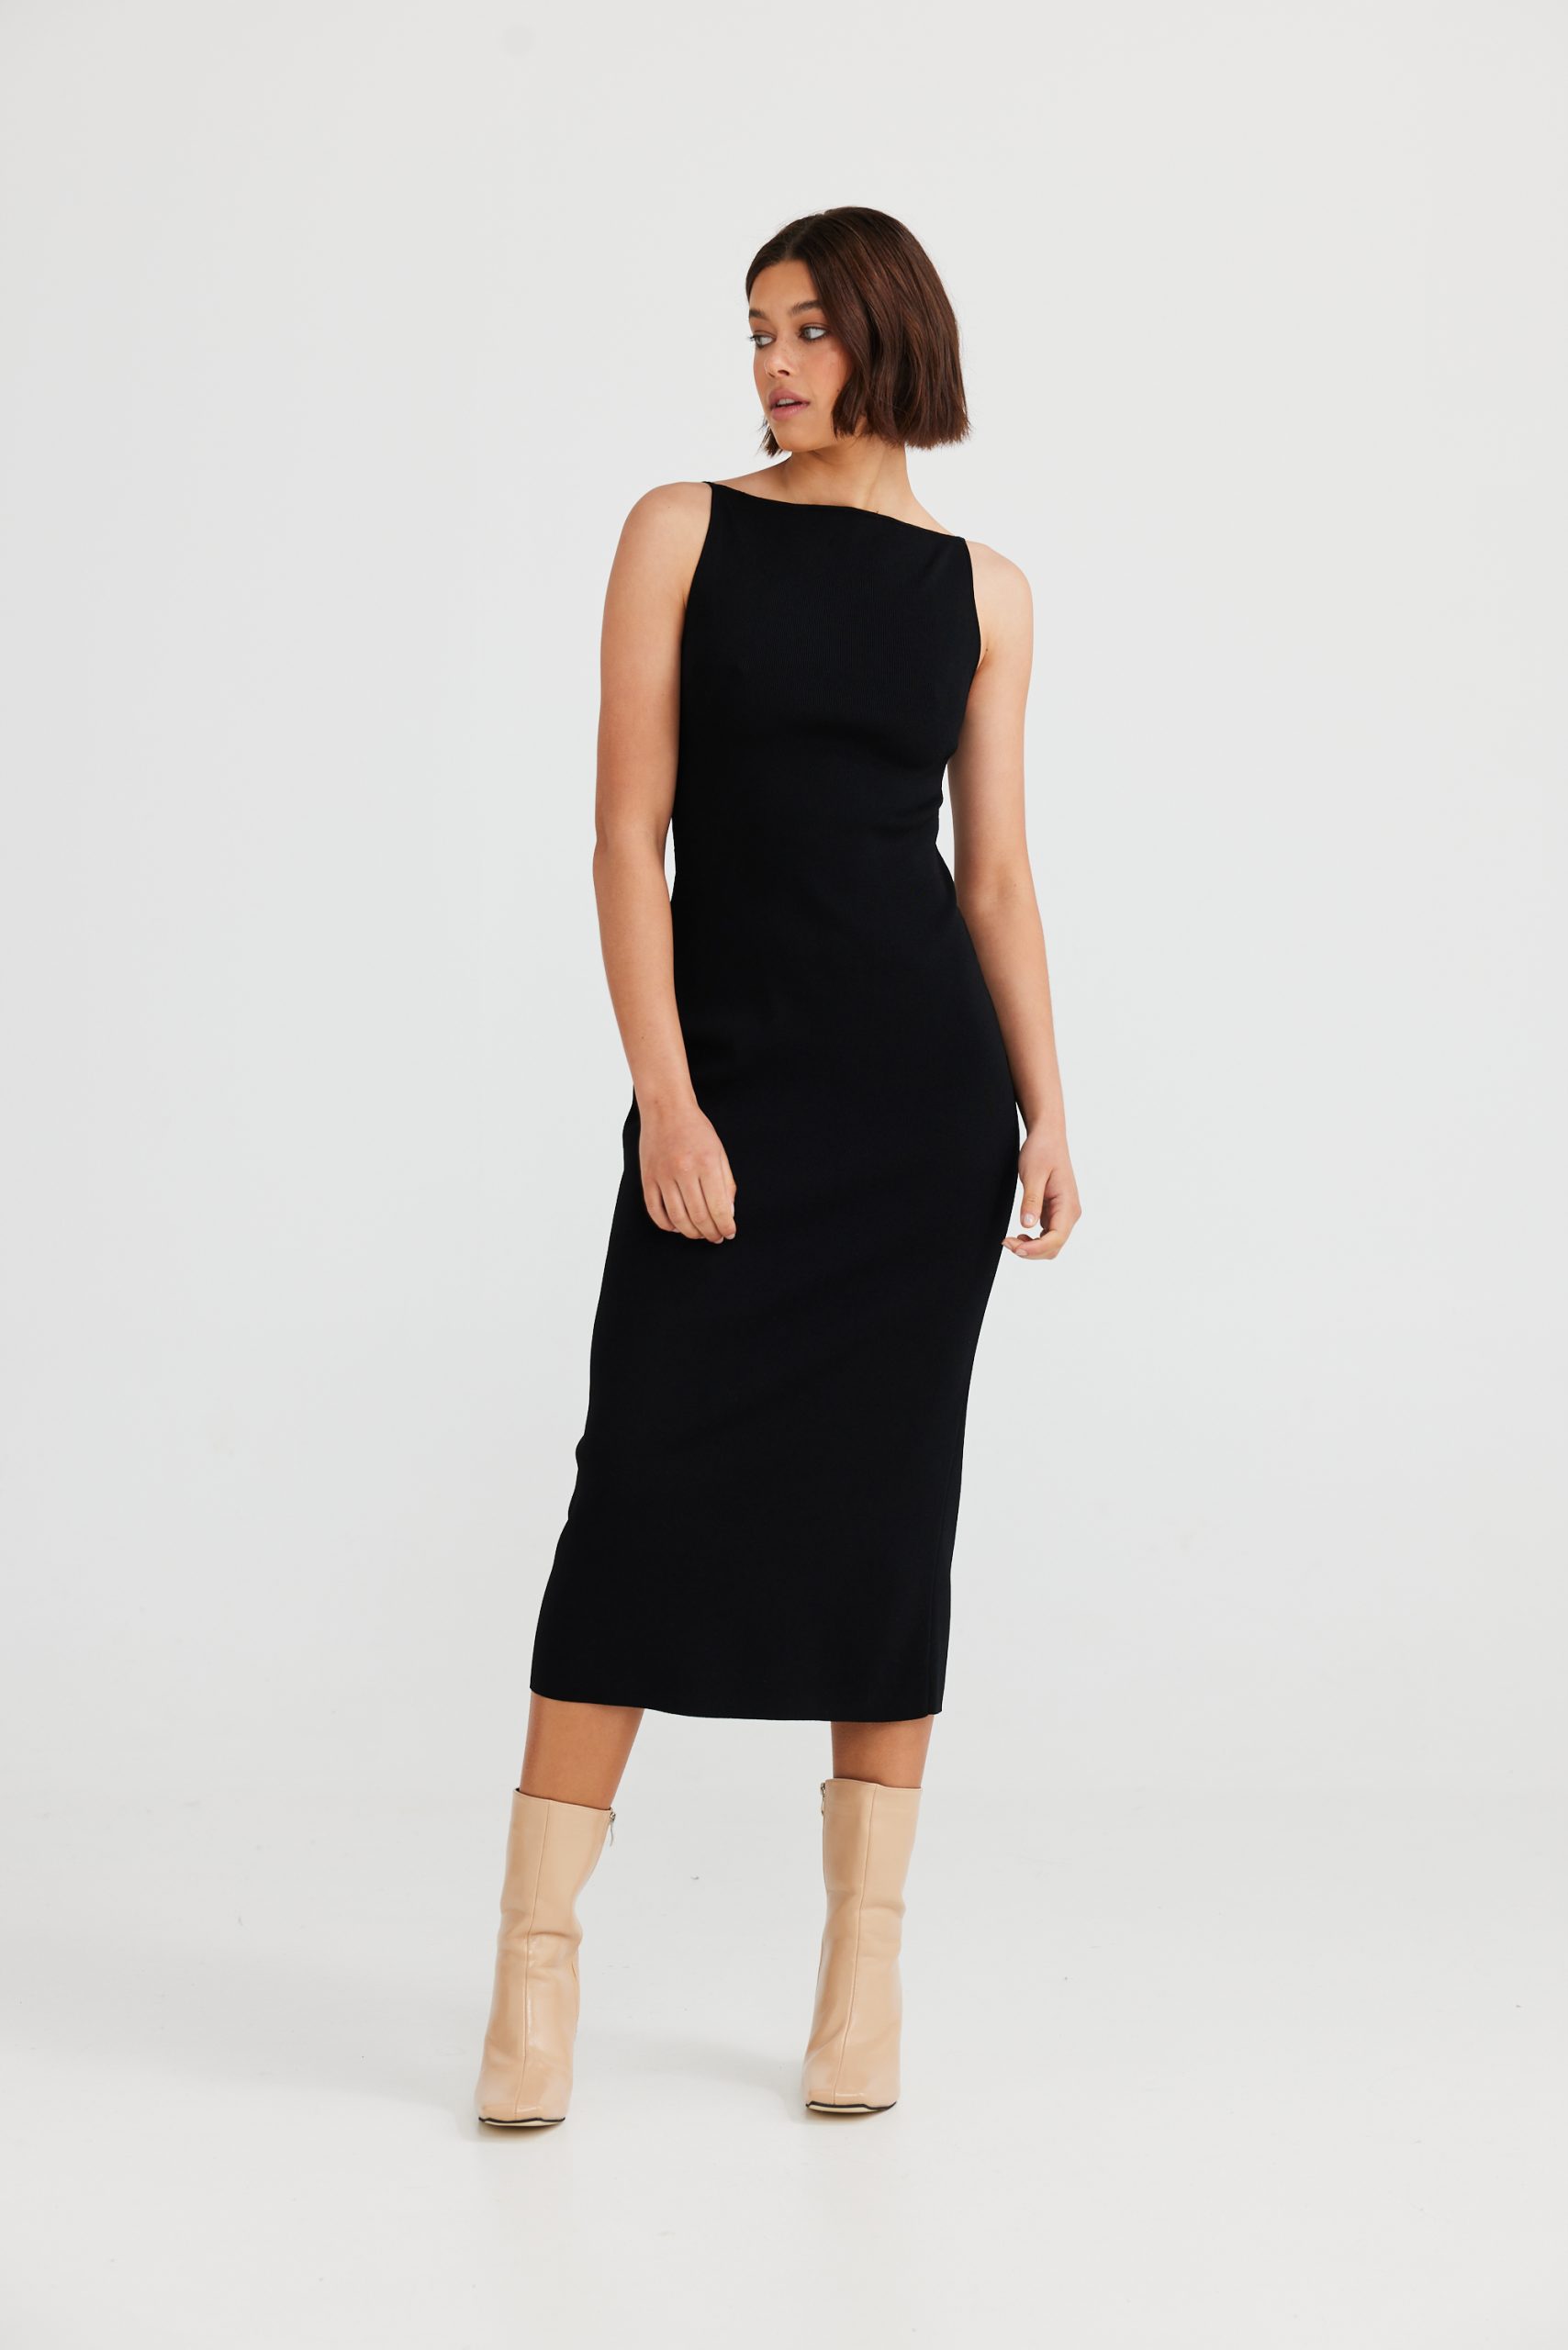 Astrid Dress – The Q Street Collective